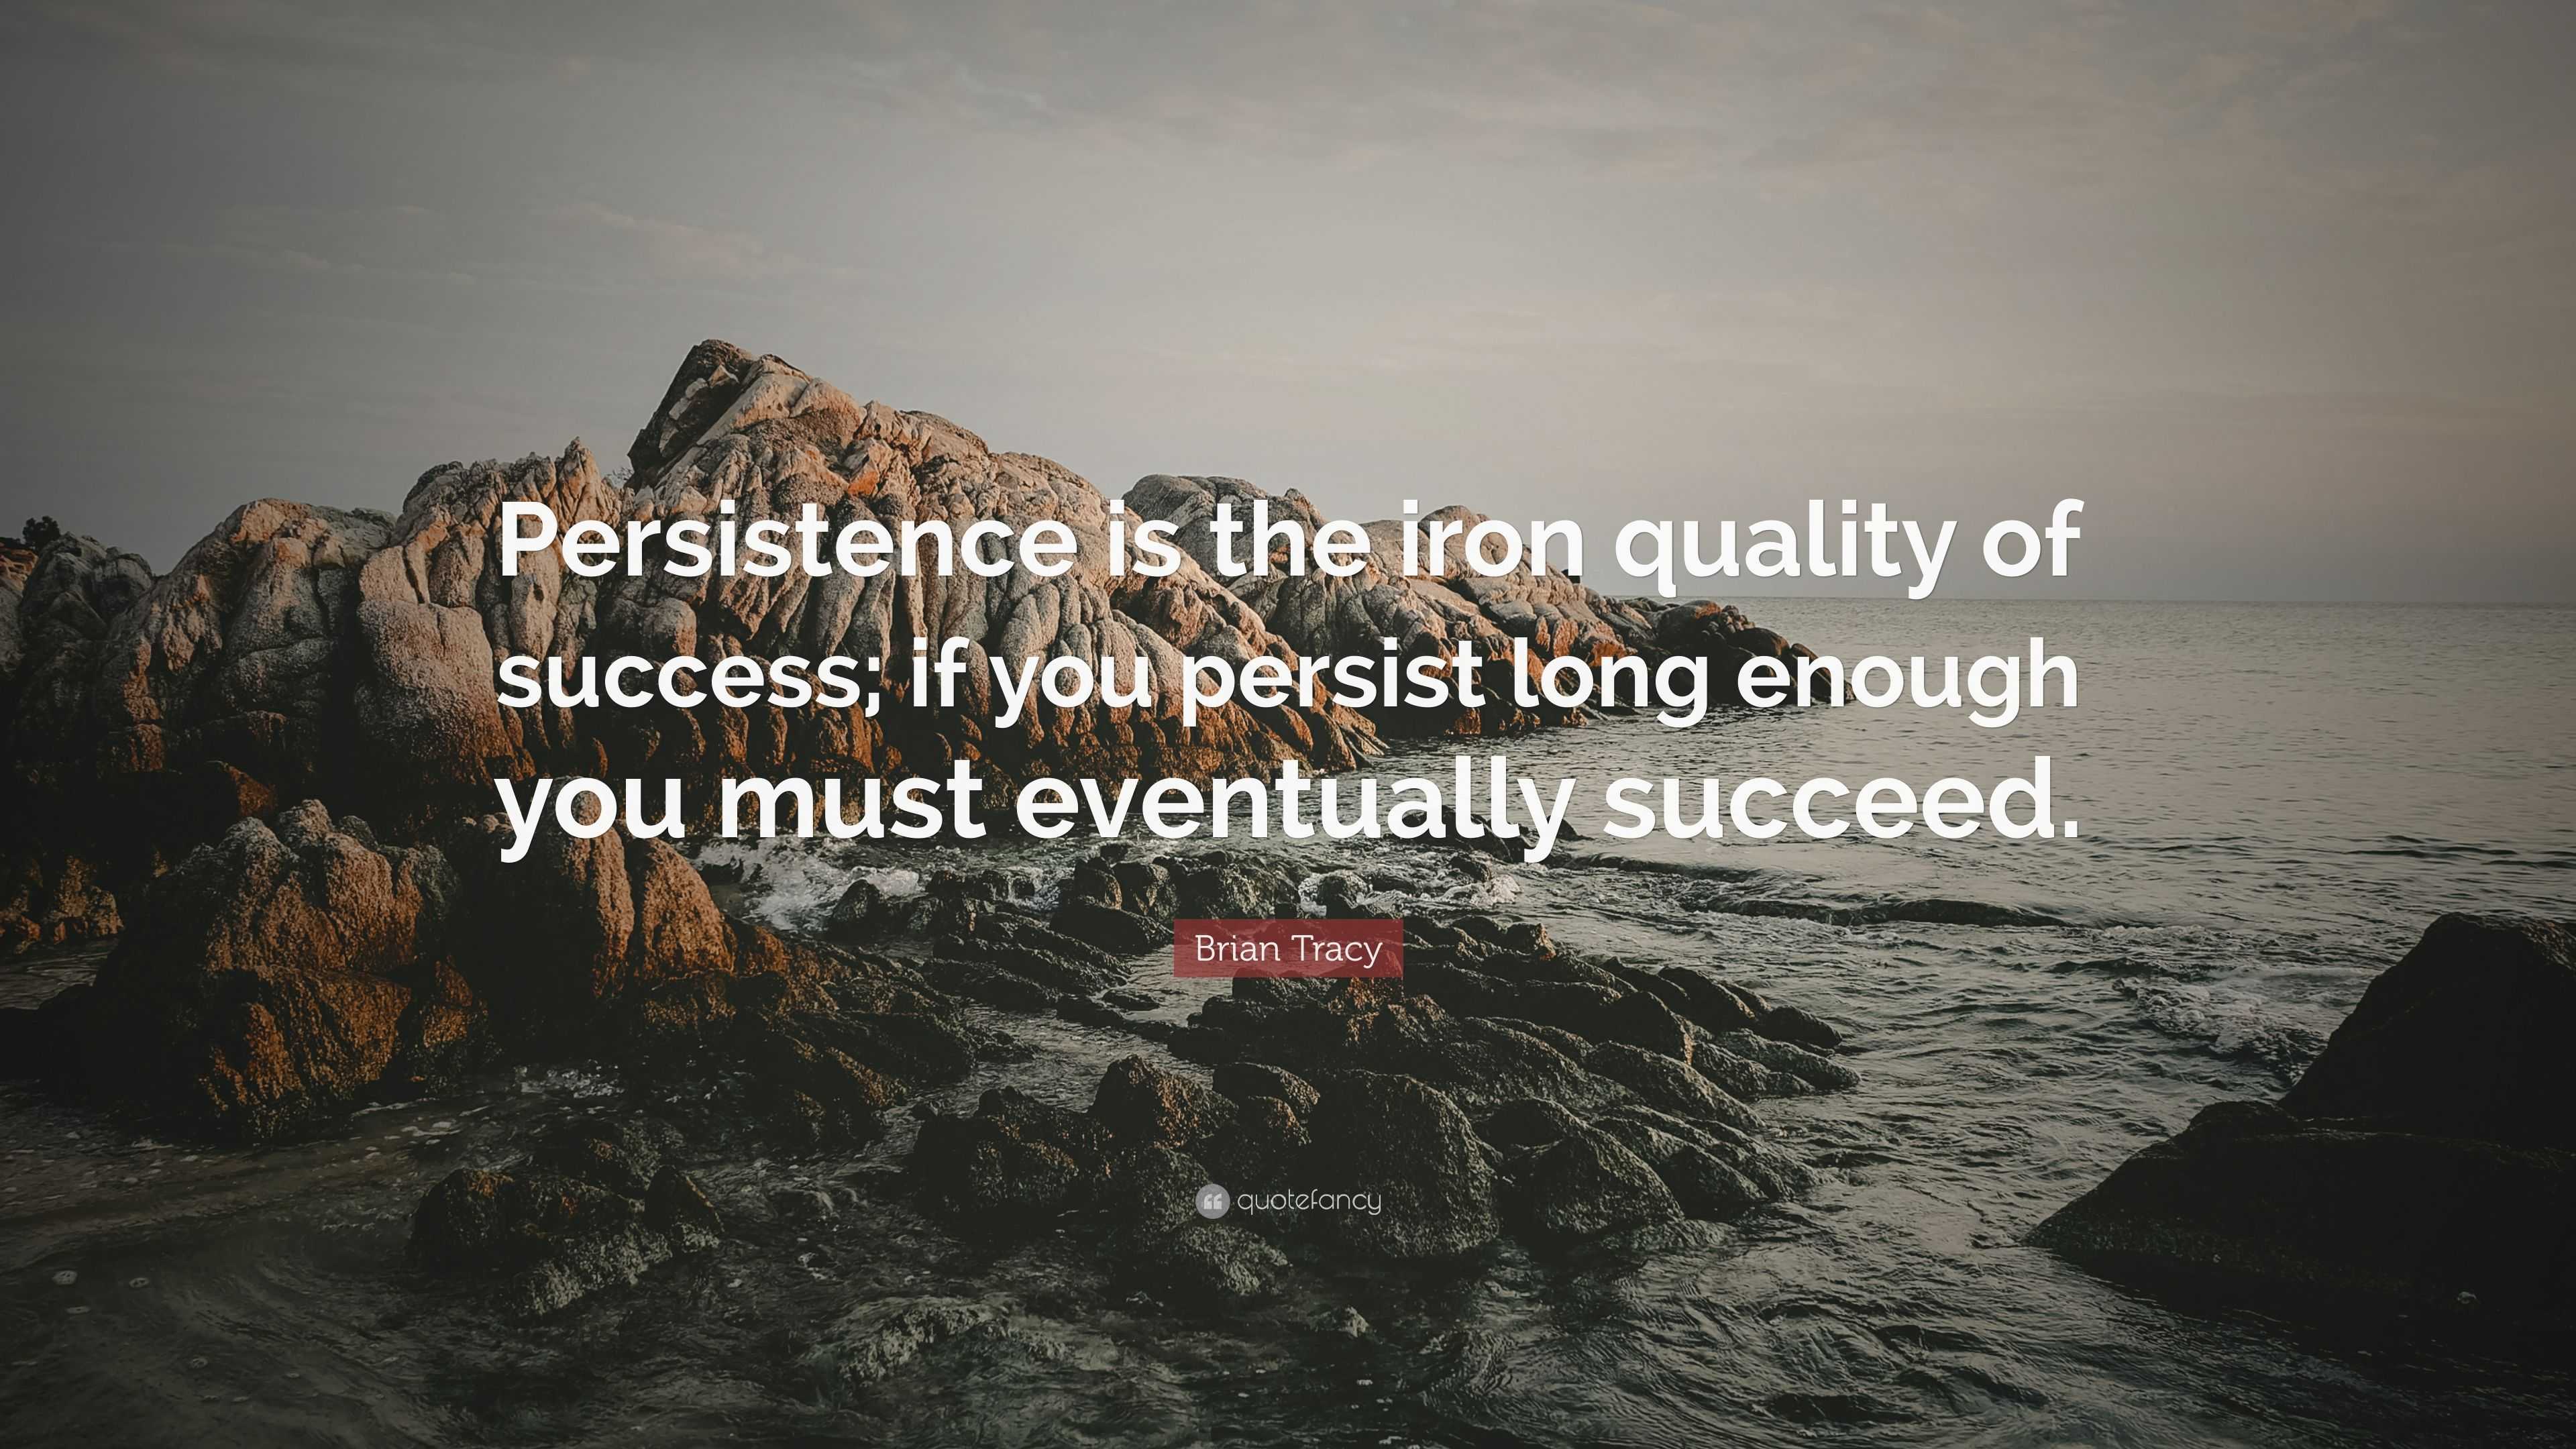 Brian Tracy Quote “Persistence is the iron quality of